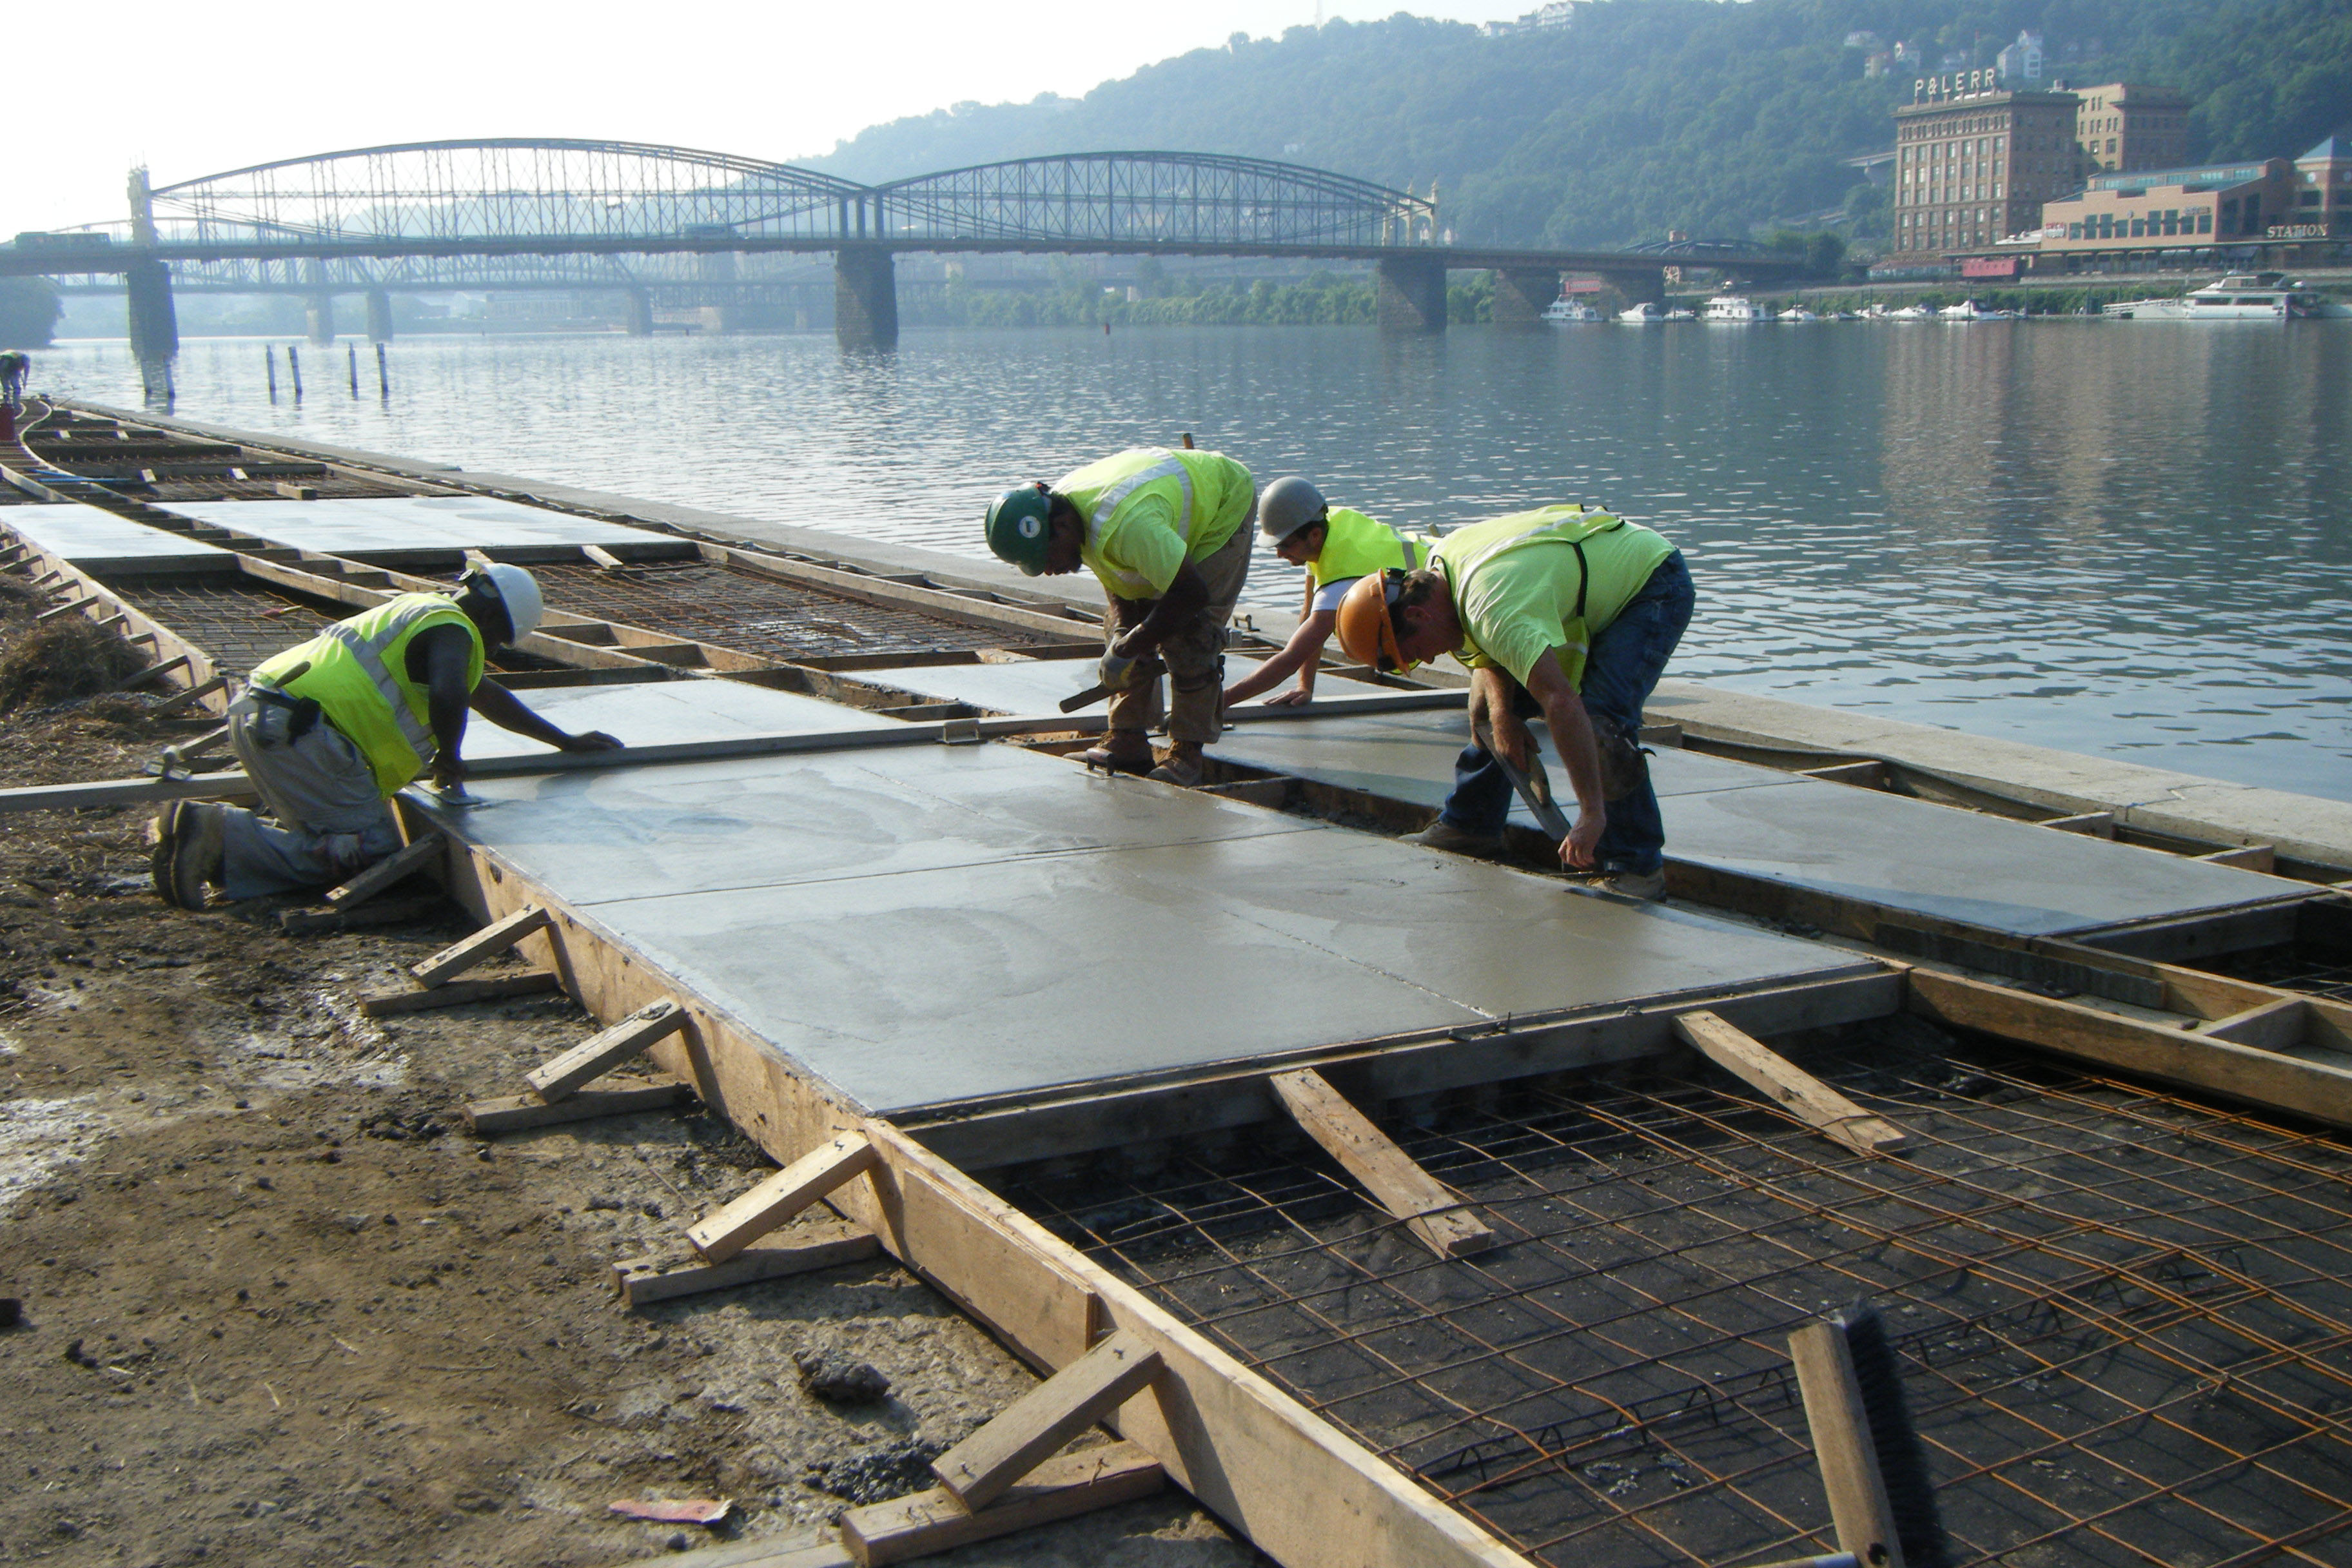 Construction workers pour cement on the Mon Wharf next to the river.